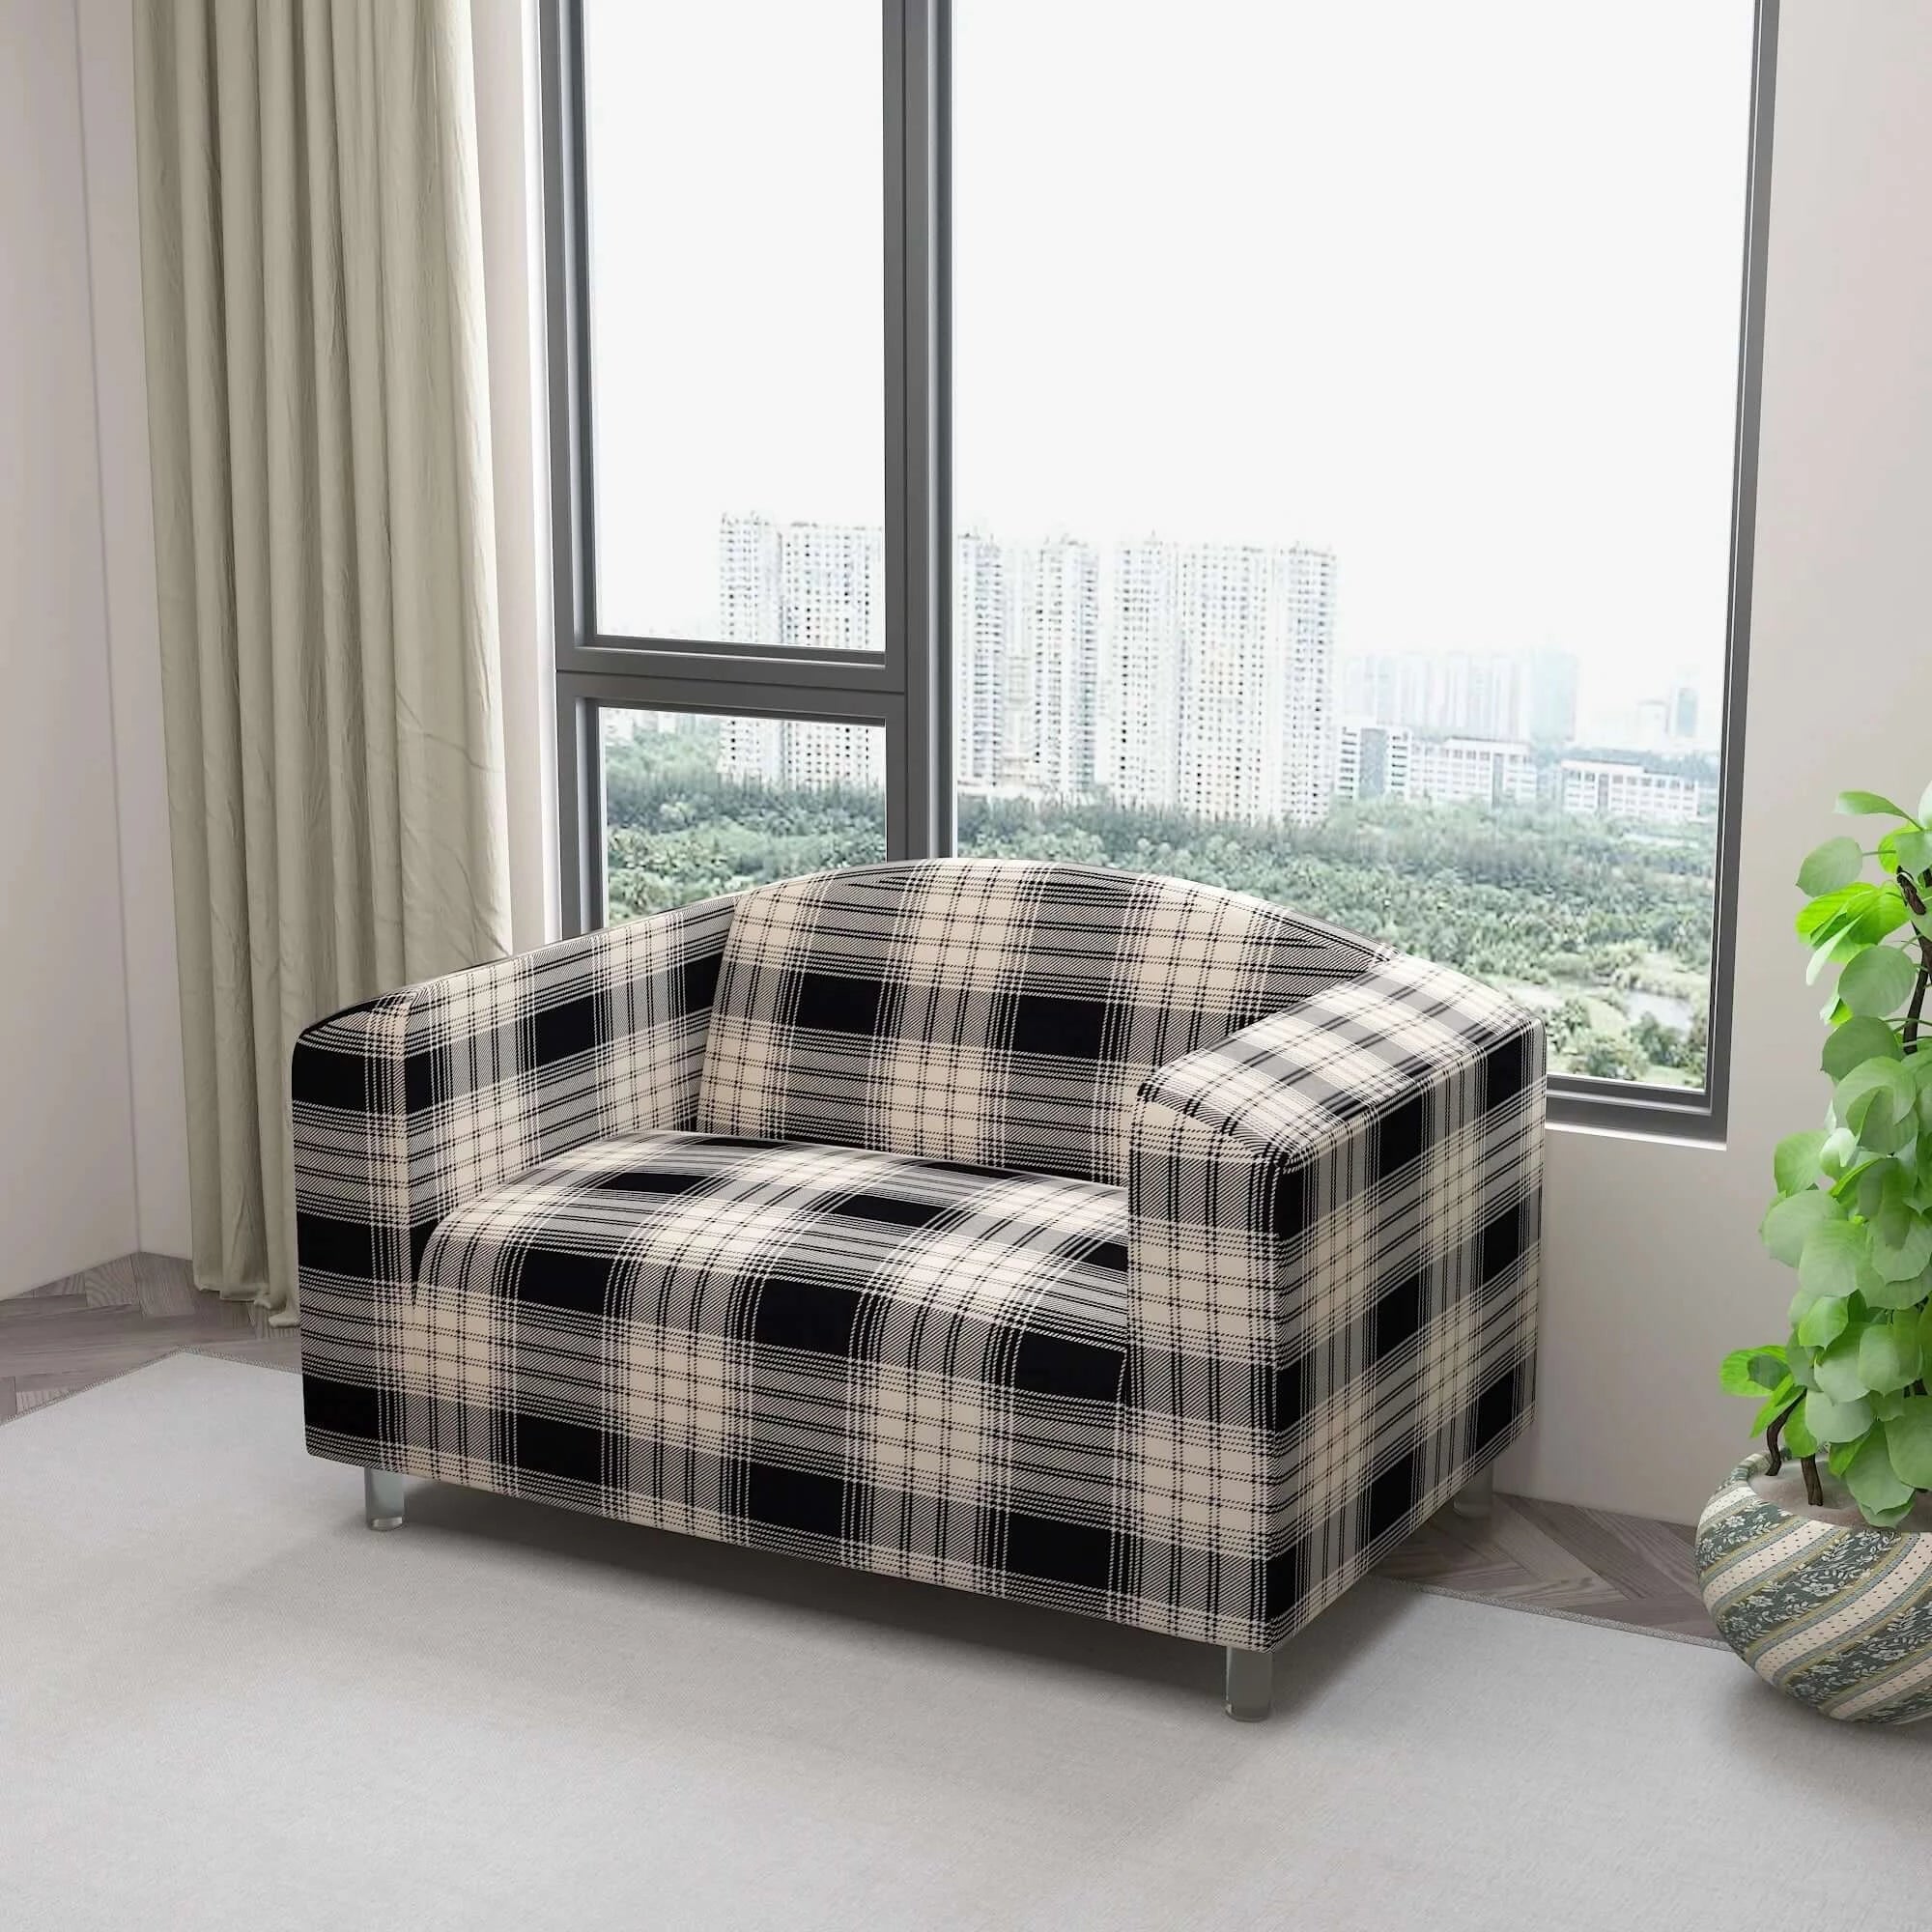 Marigold Printed Sofa Protector Cover Full Stretchable, MG07 - Dream Care Furnishings Private Limited